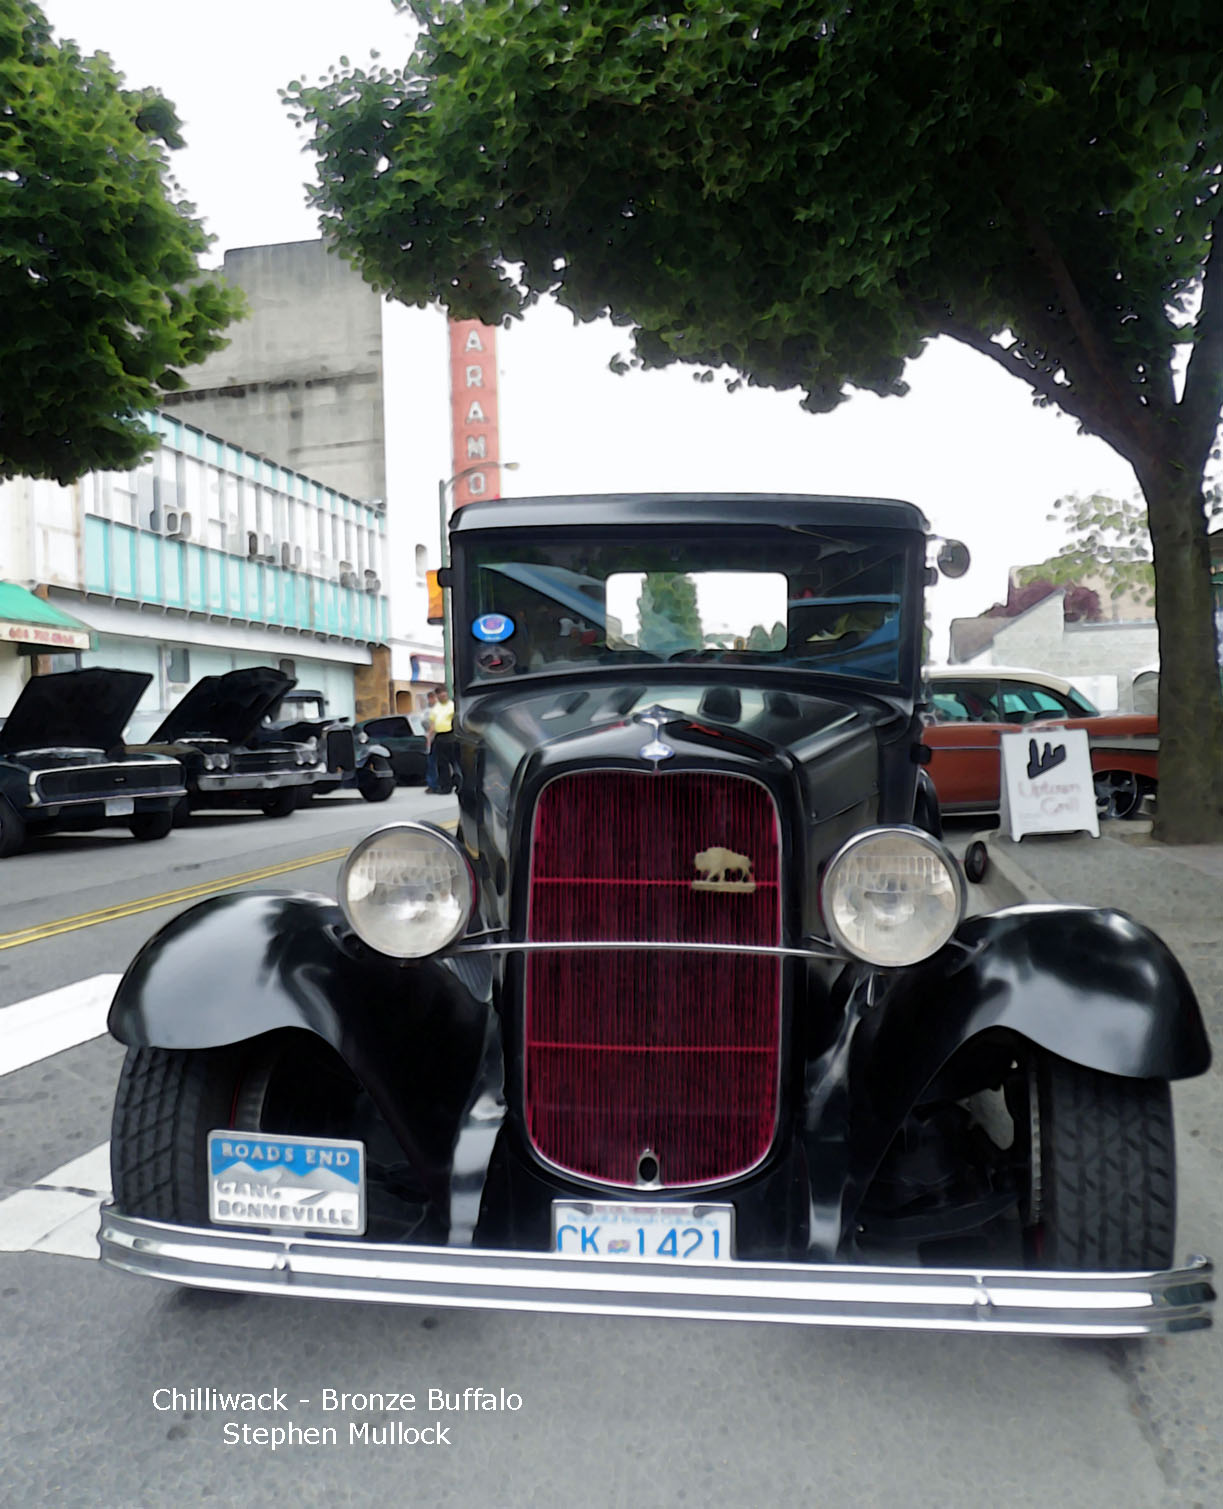 1930 Ford Truck in Chilliwack